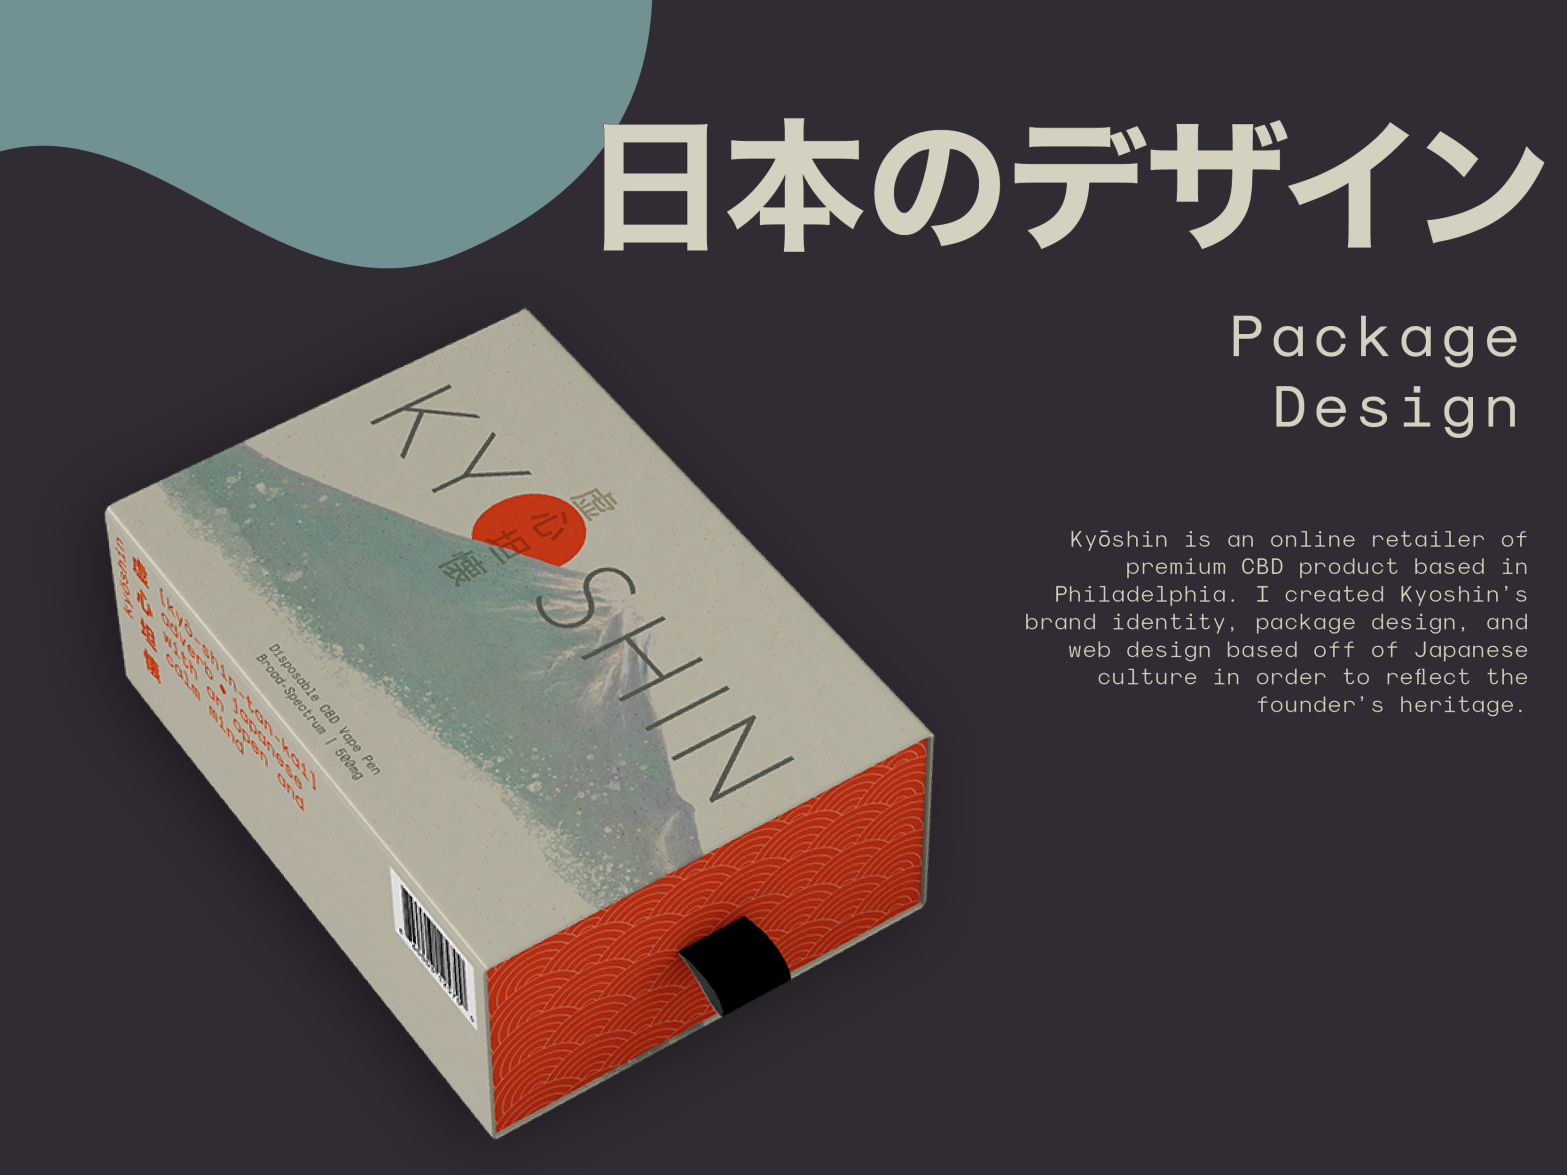 Japanese Inspired Package Design by Meesh Scannapieco on 